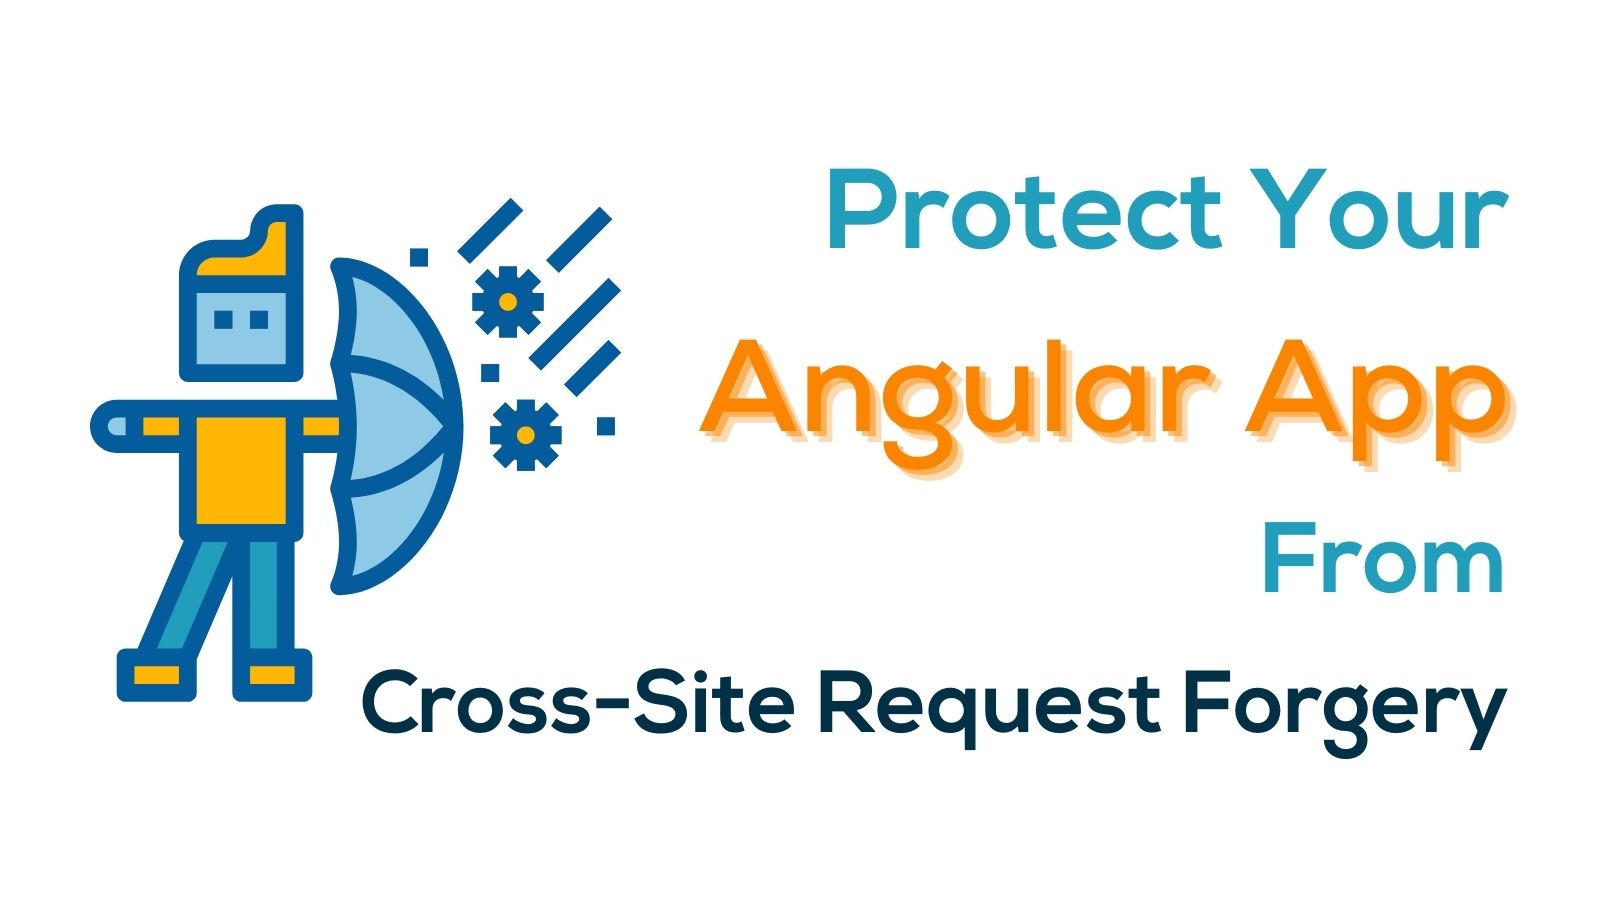 Protect Your Angular App From Cross-Site Request Forgery